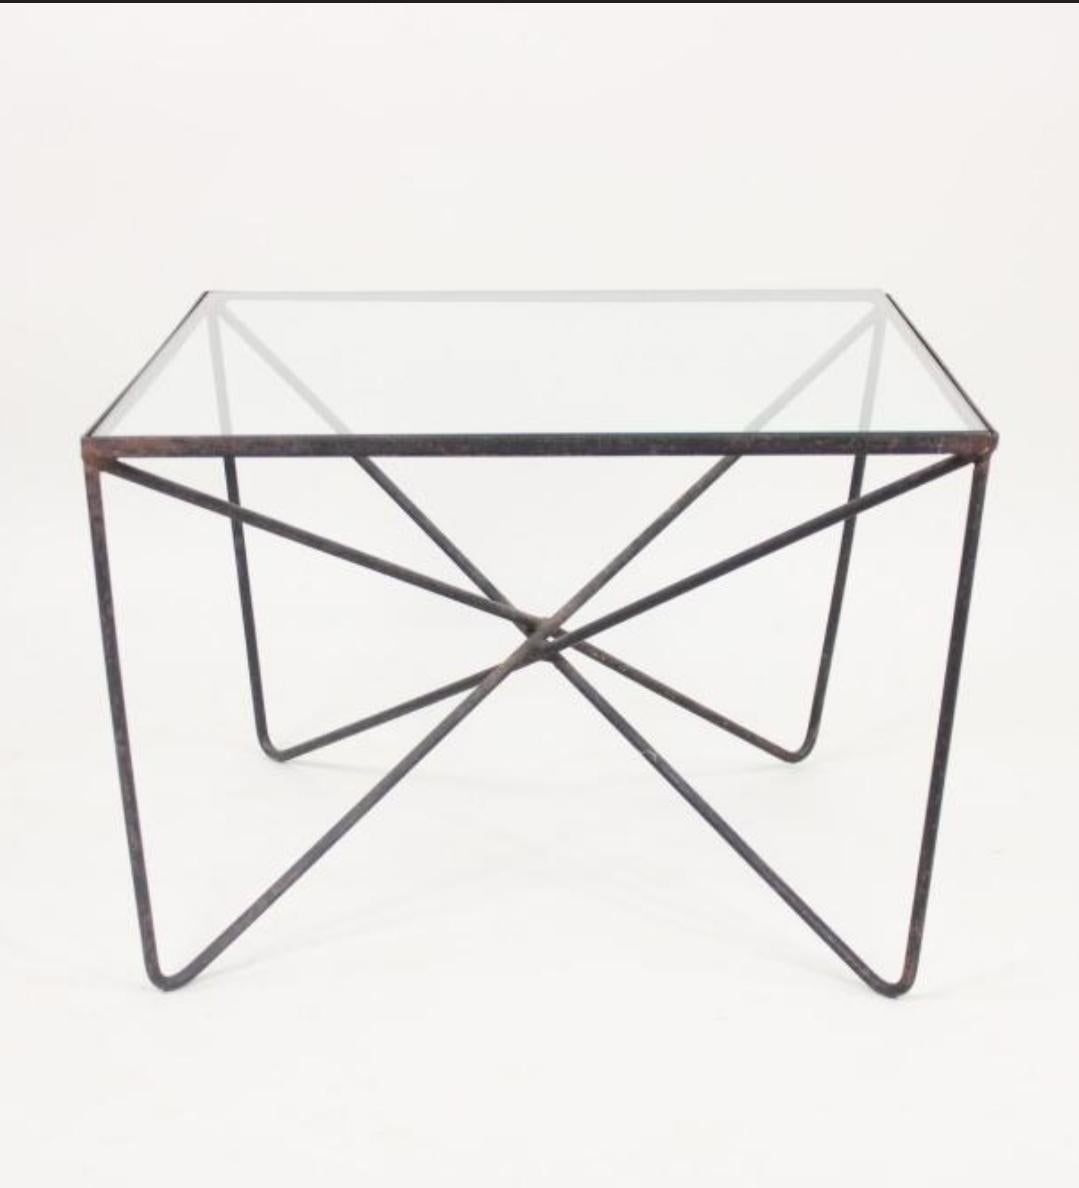 Minimalist table with frame of welded wrought iron and glass top. American by Luther Conover, 1950’s
Dimensions: 15.5h x 22.5w x 22.5d.
This item can be viewed in person at The Berkshire Galleries of Great Barrington Massachusetts.

